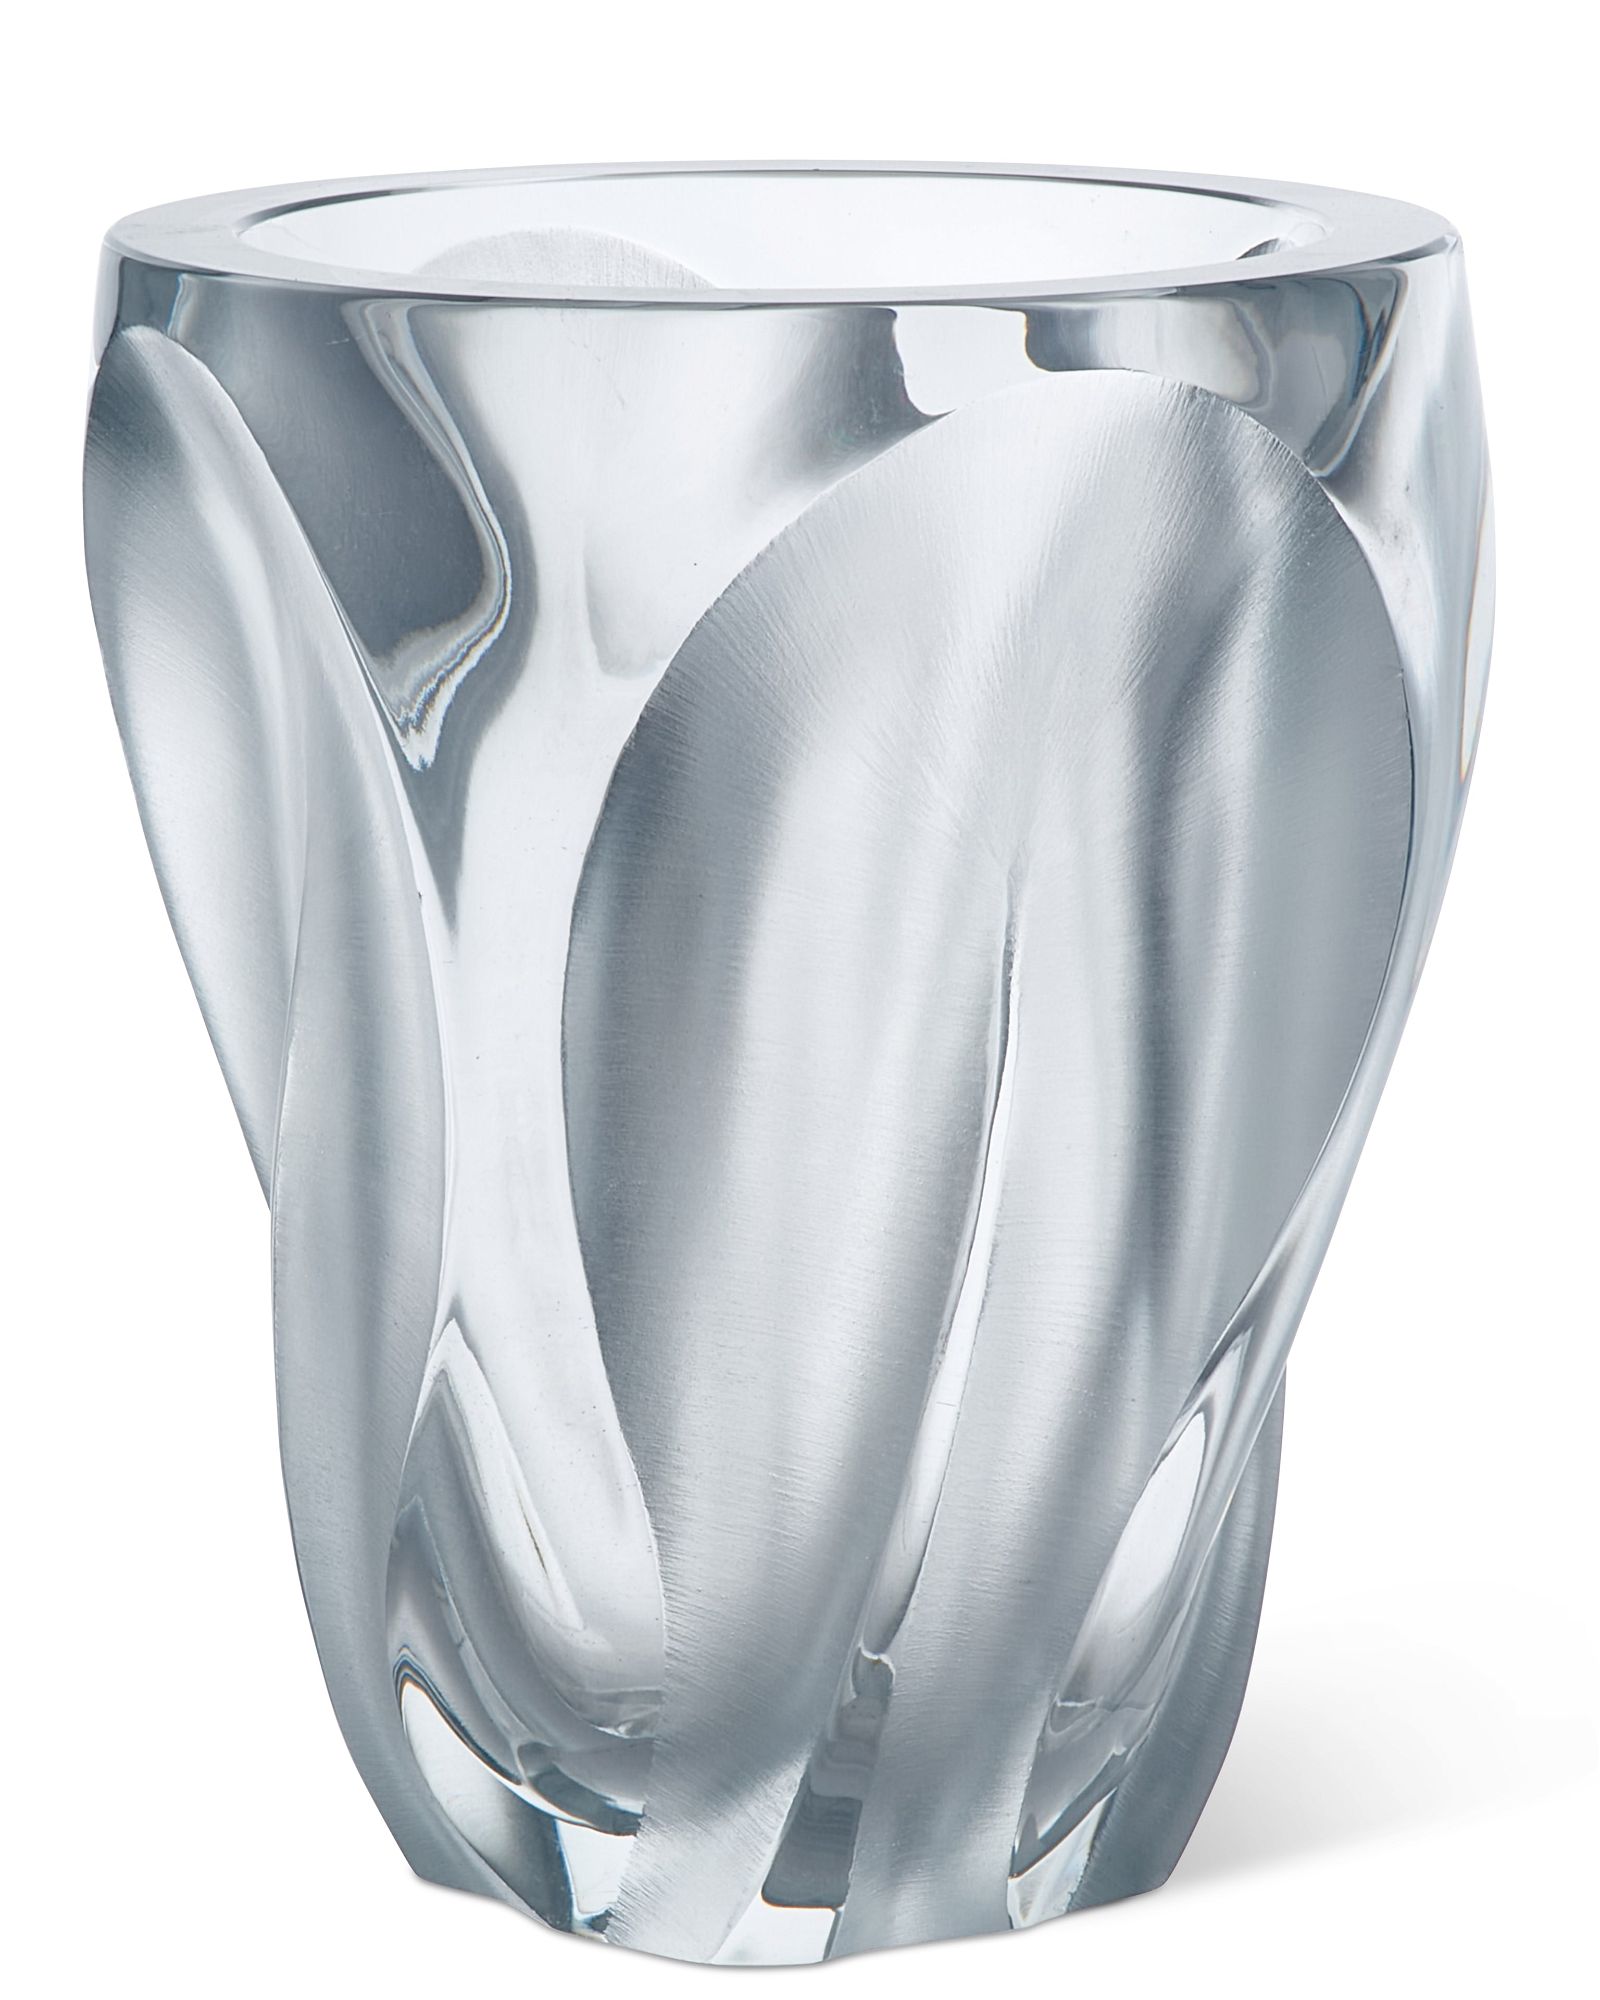 A LALIQUE CLEAR AND FROSTED GLASS